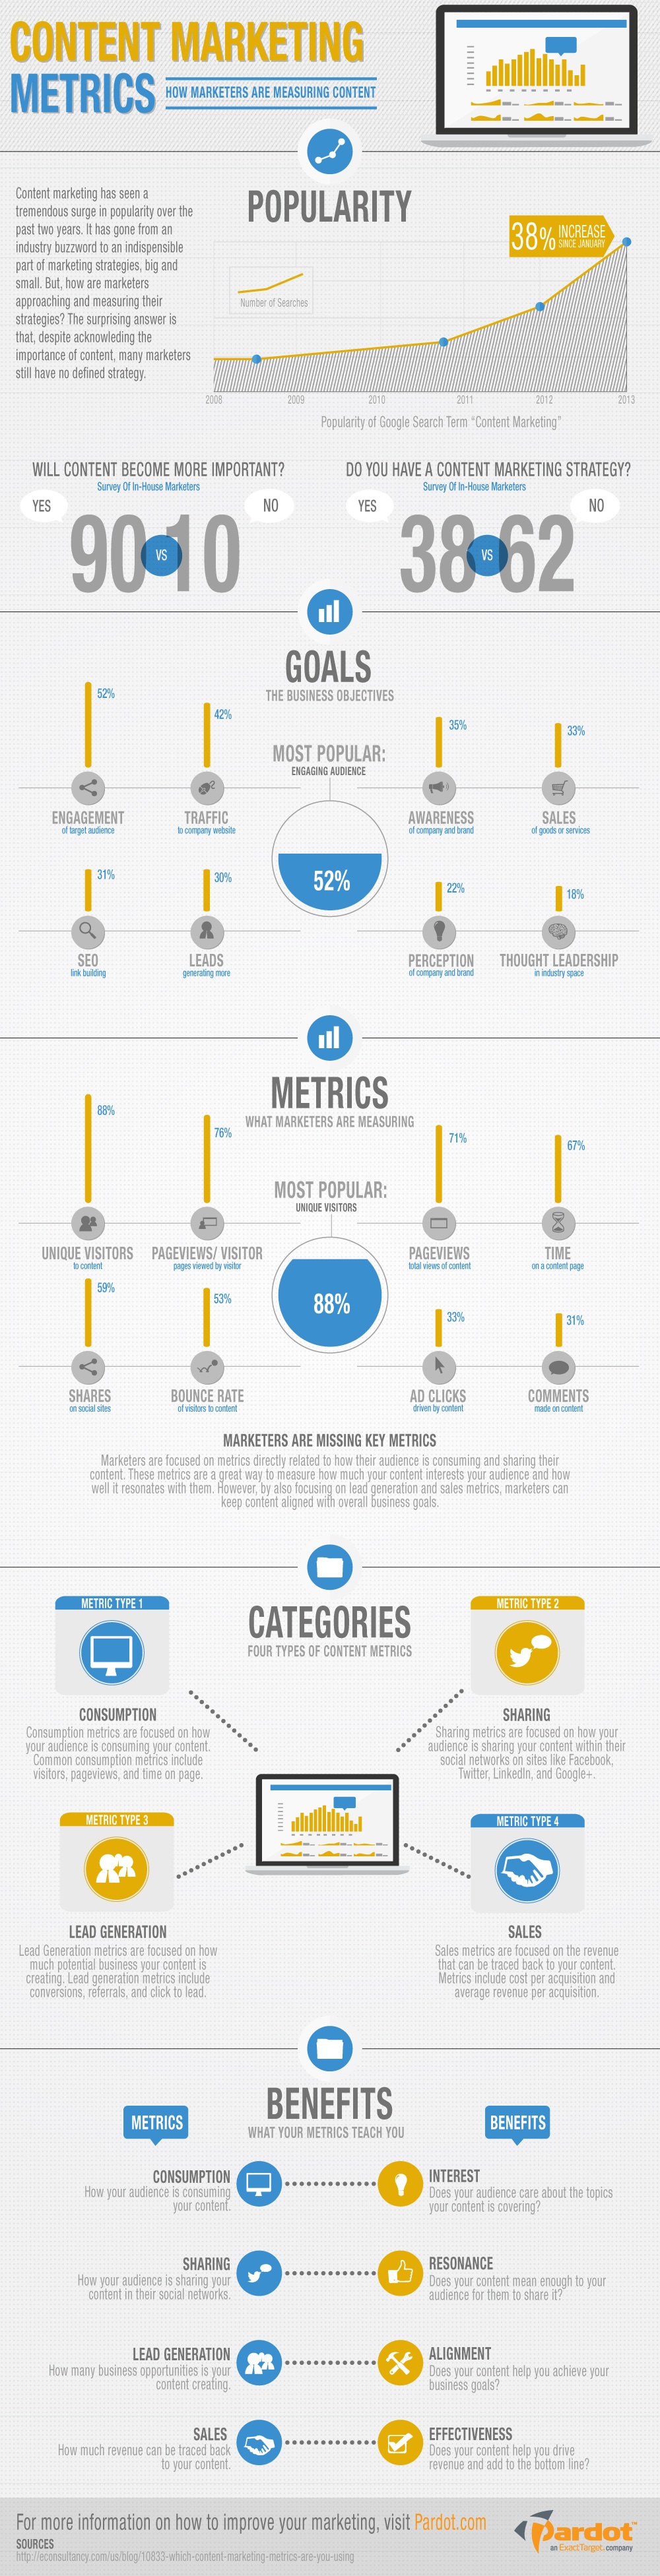 How To Measure The Effectiveness Of Content Marketing [Infographic]